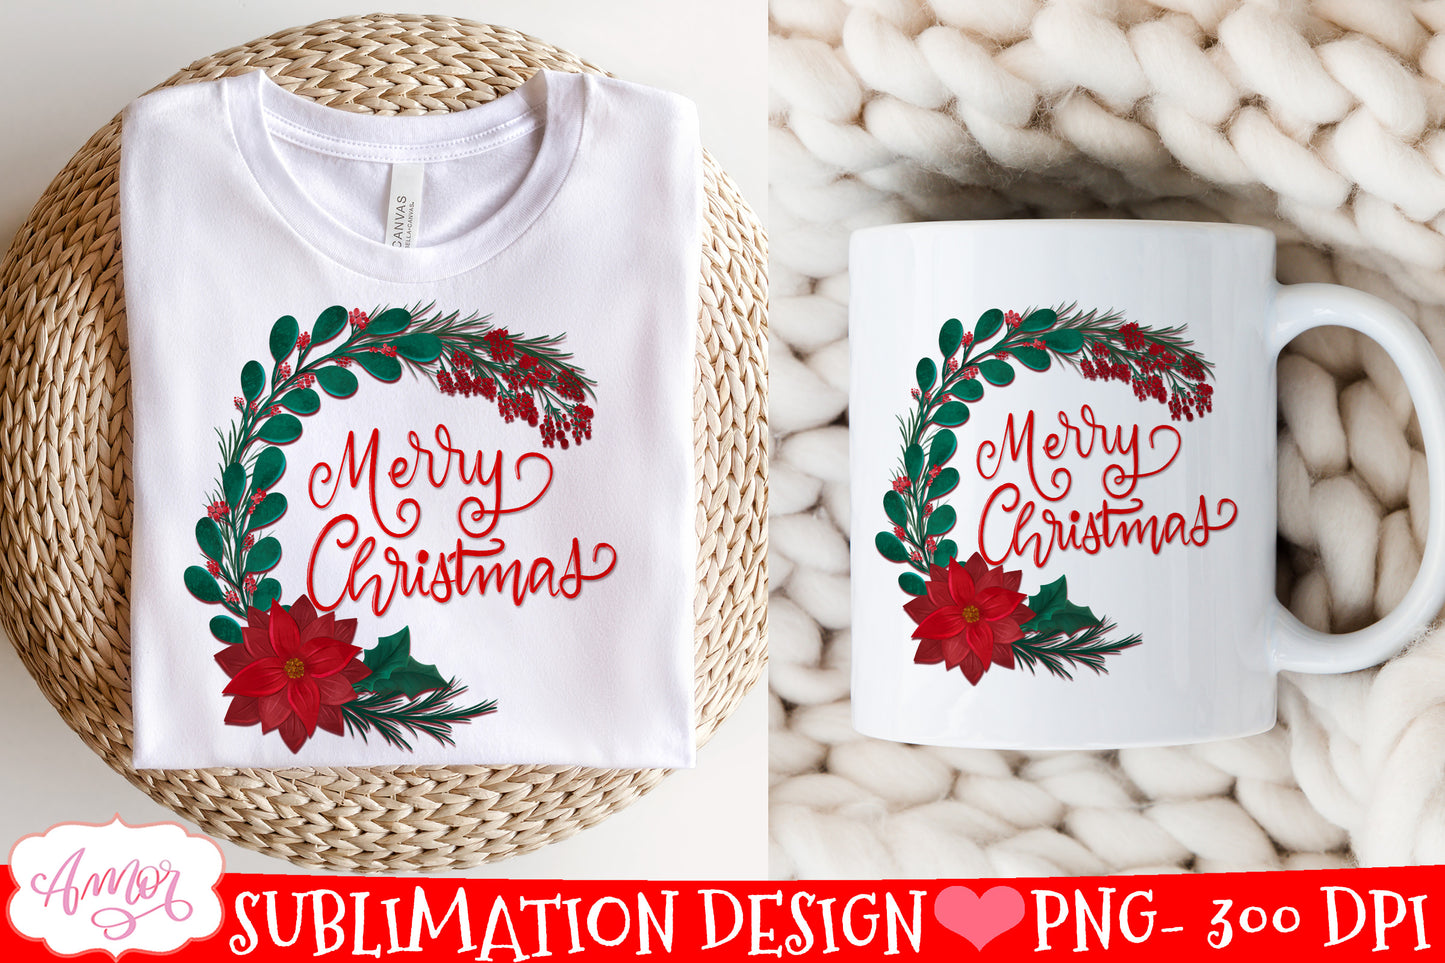 Merry Christmas wreath PNG for sublimation